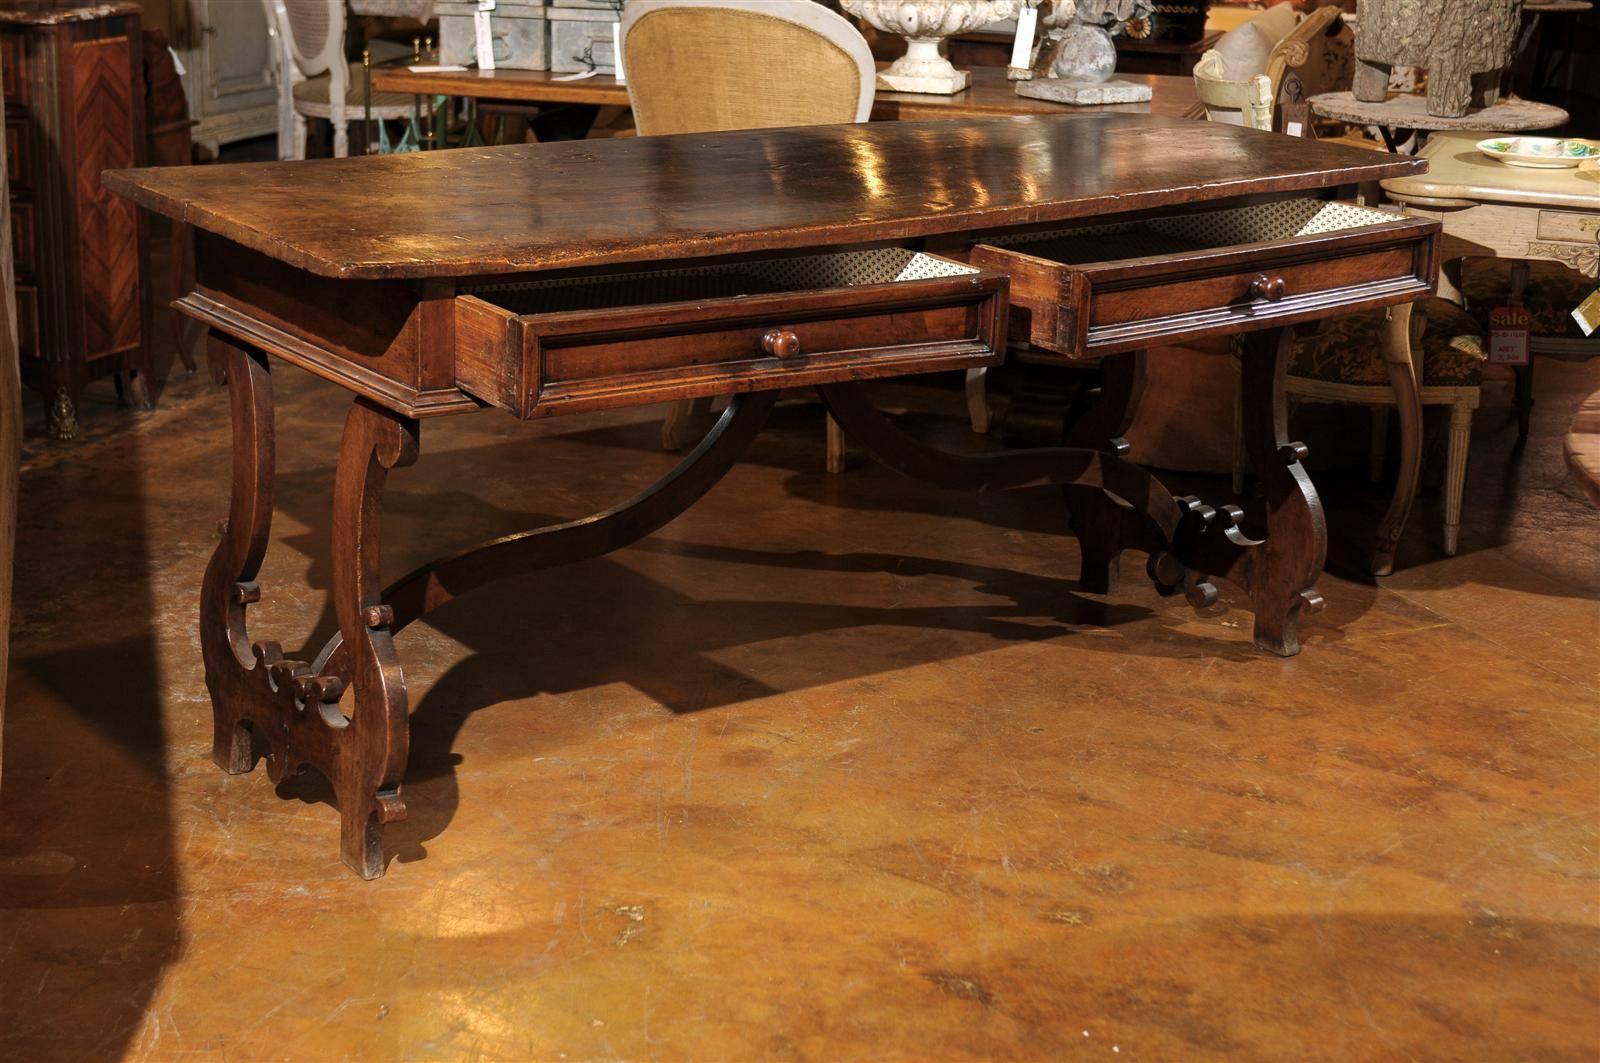 Wood Italian Baroque Style 1890s Walnut Desk with Lyre Shaped Legs and Two Drawers